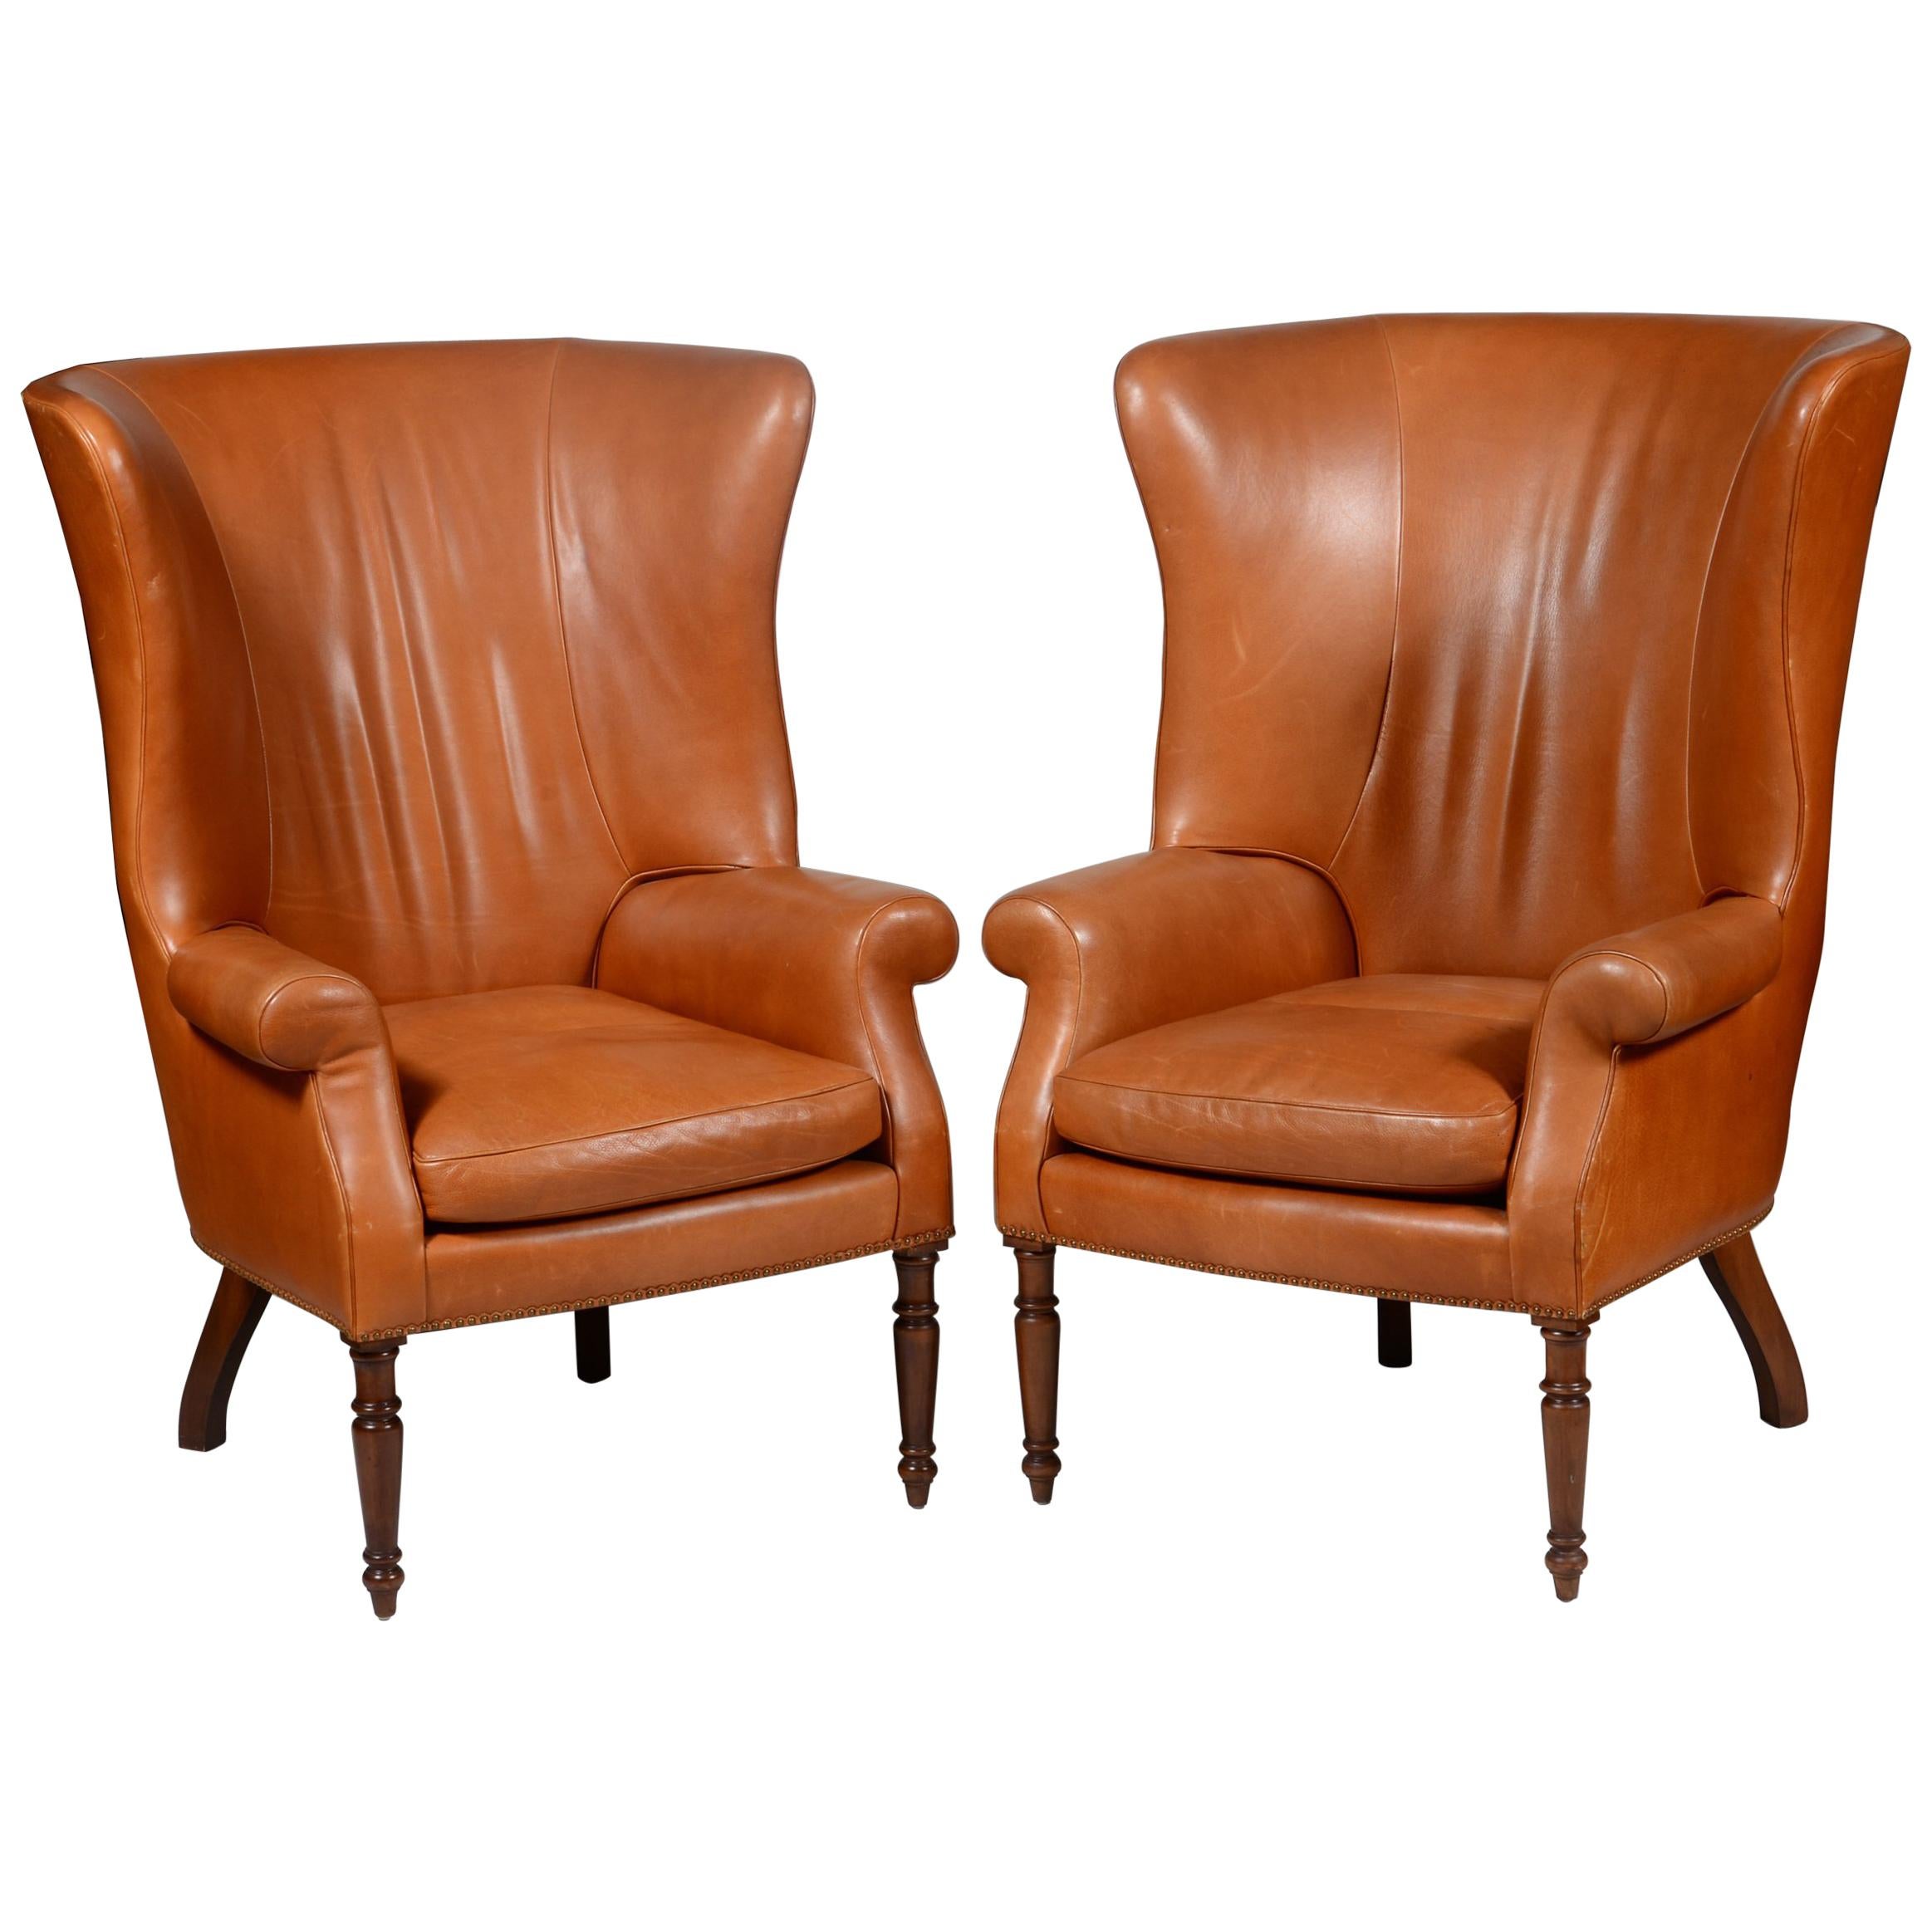 Pair of Classic High Back Saddle Leather Wing Back Fireplace or Parlour Chairs